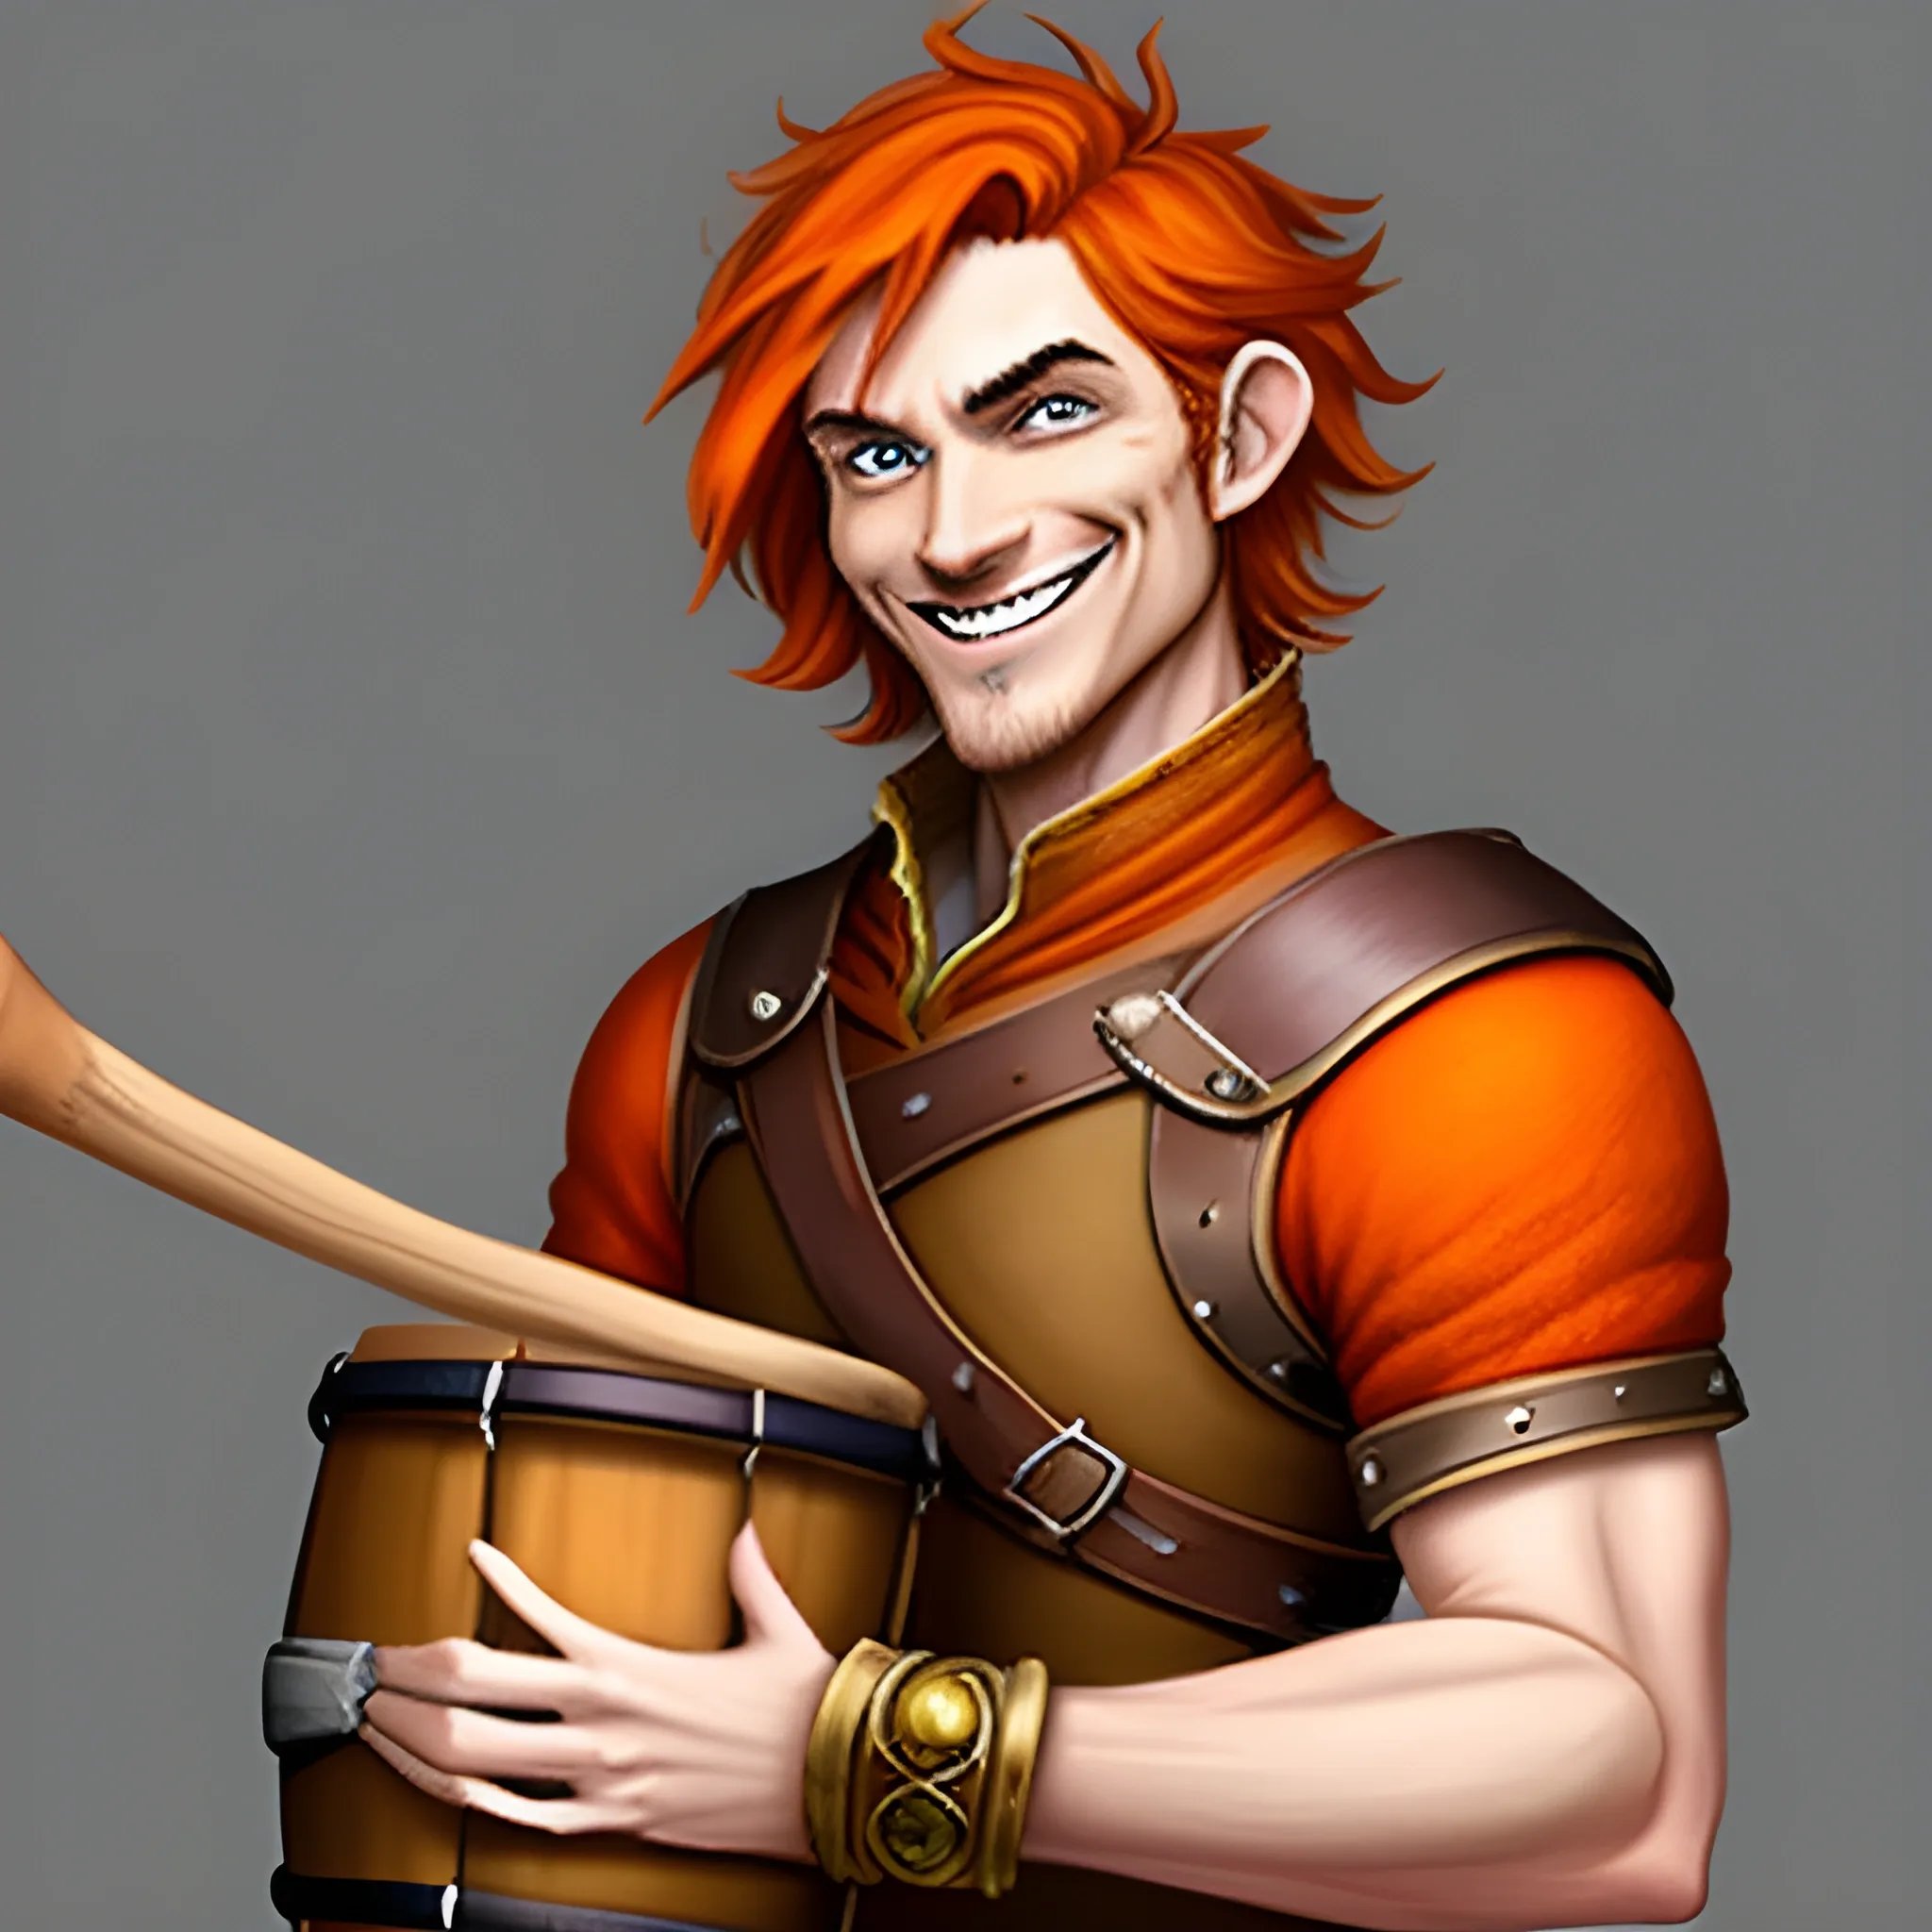 DnD fantasy thin skinny baby face young halfling male short haired dark orange ginger smiling with a mugshot expression and playing a drum